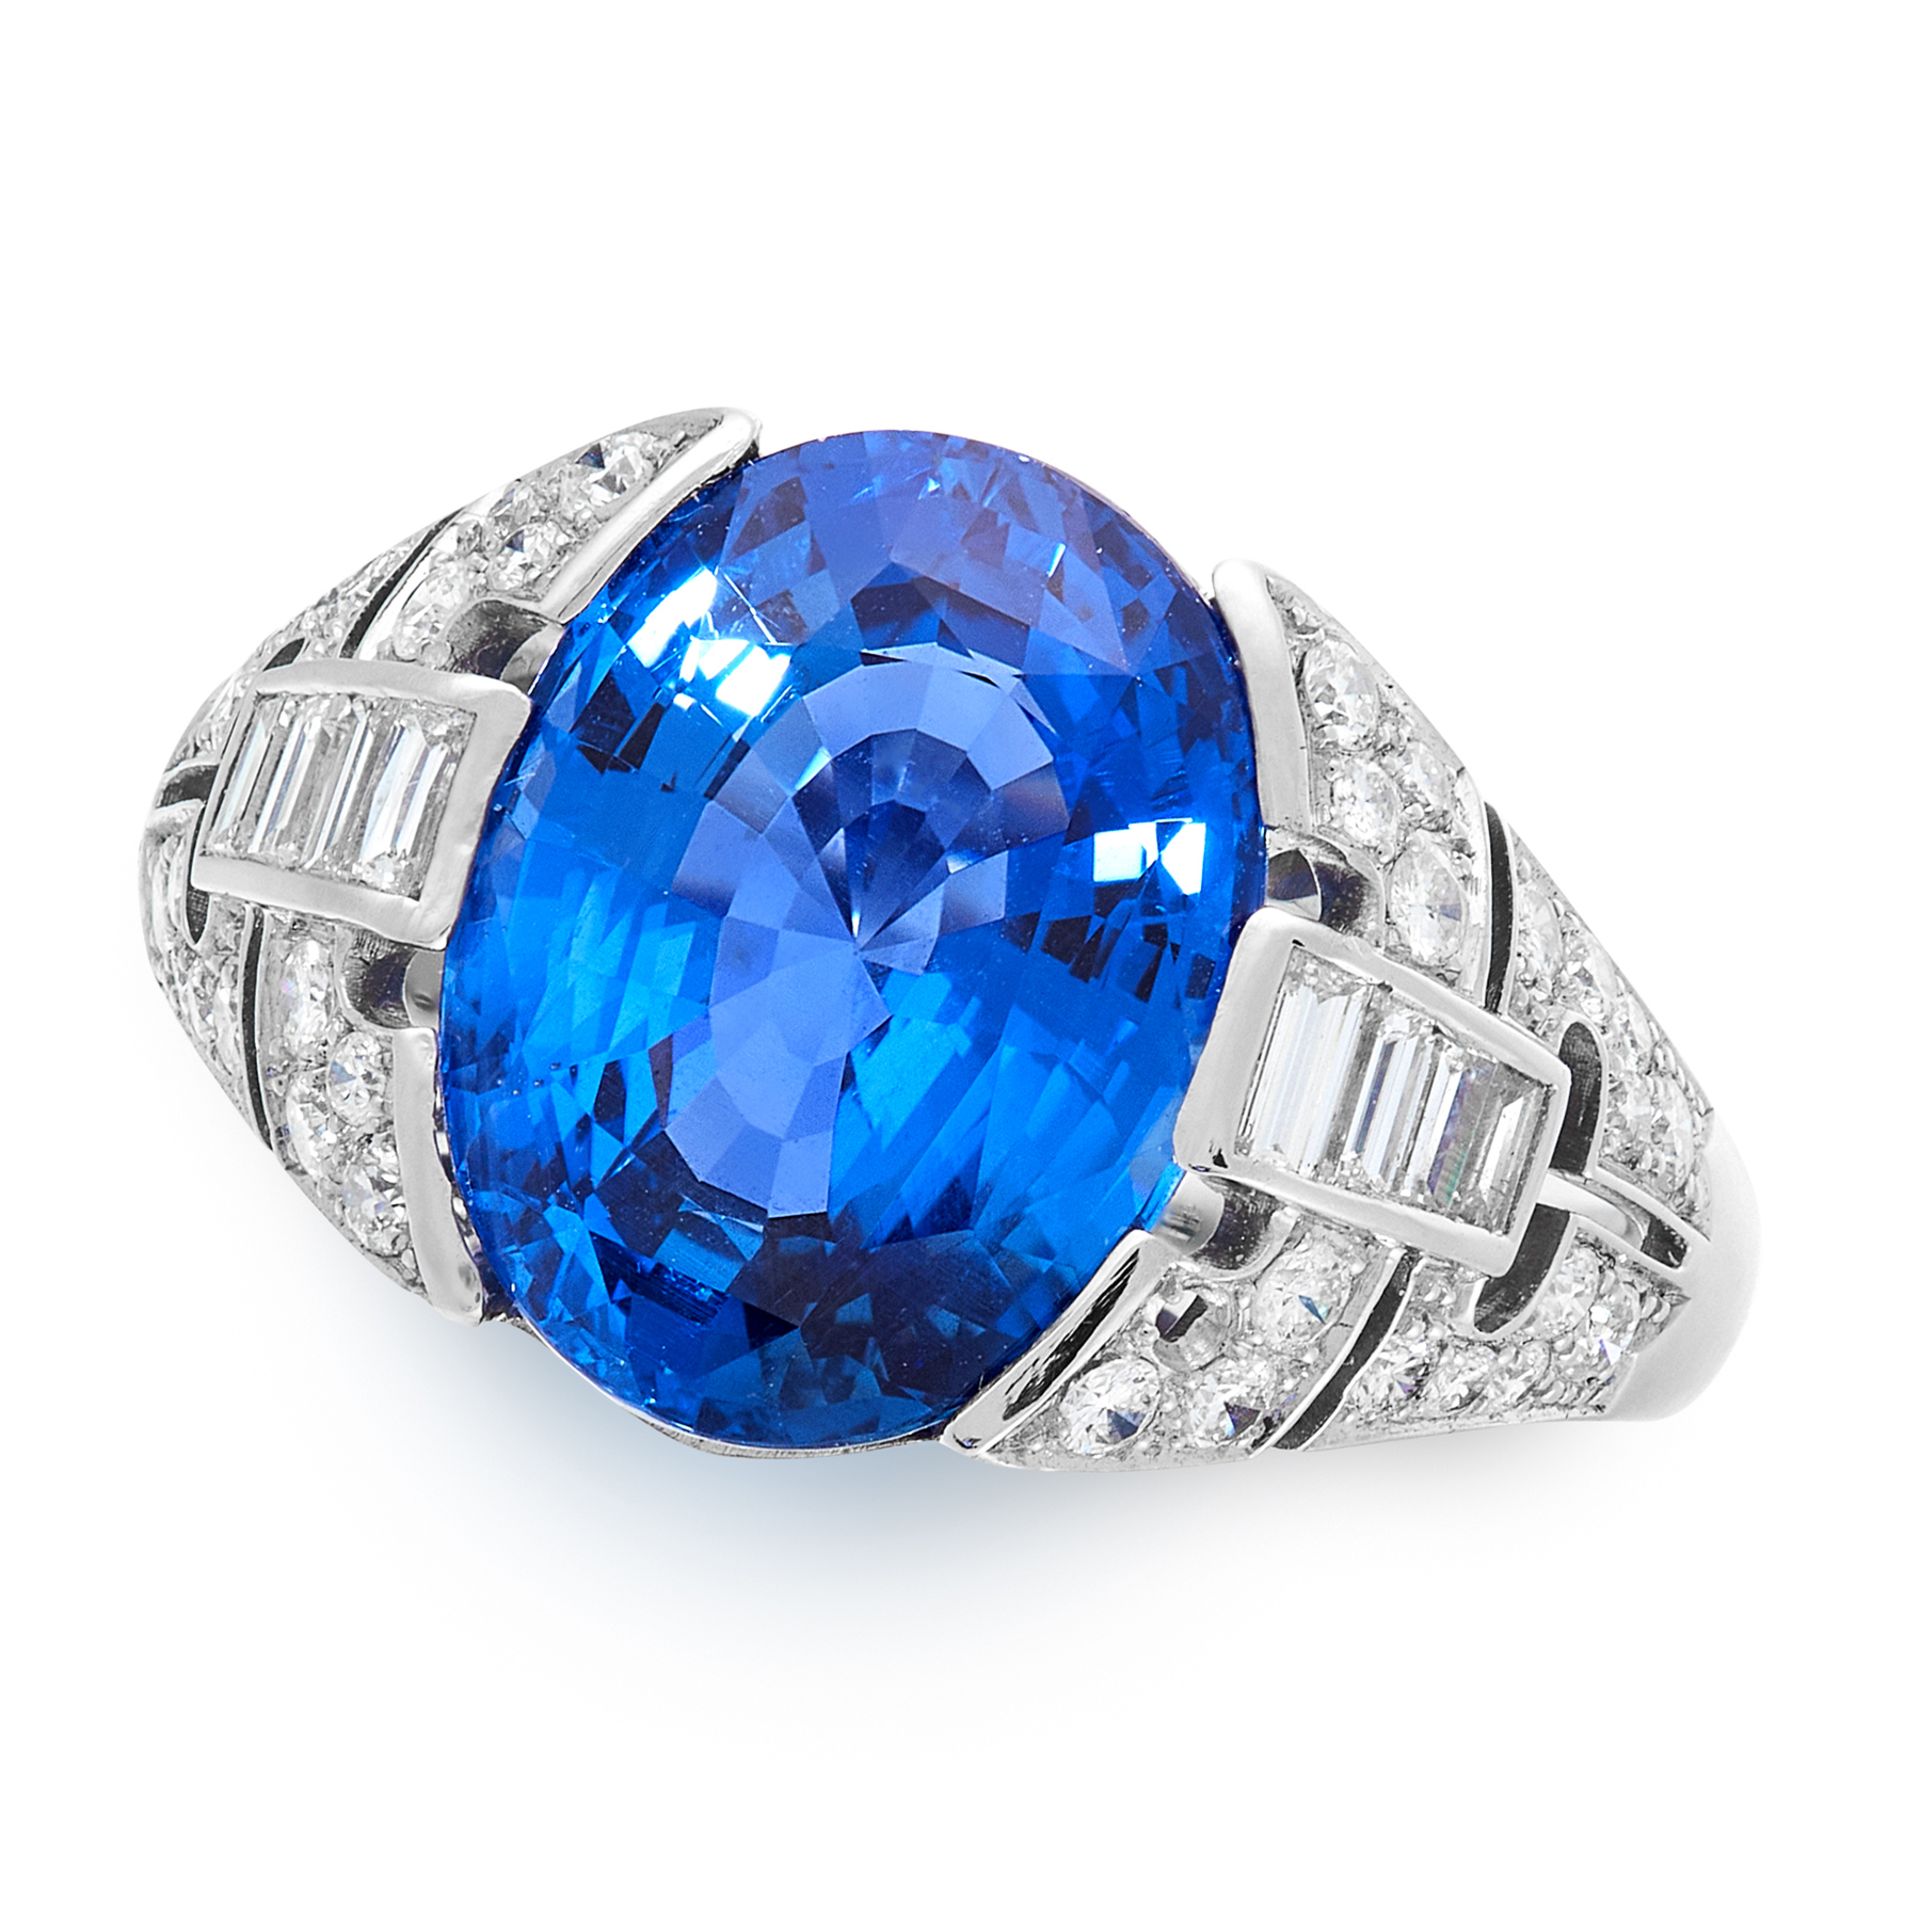 A CEYLON NO HEAT SAPPHIRE AND DIAMOND RING in platinum, set with an oval cut blue sapphire of 6.74